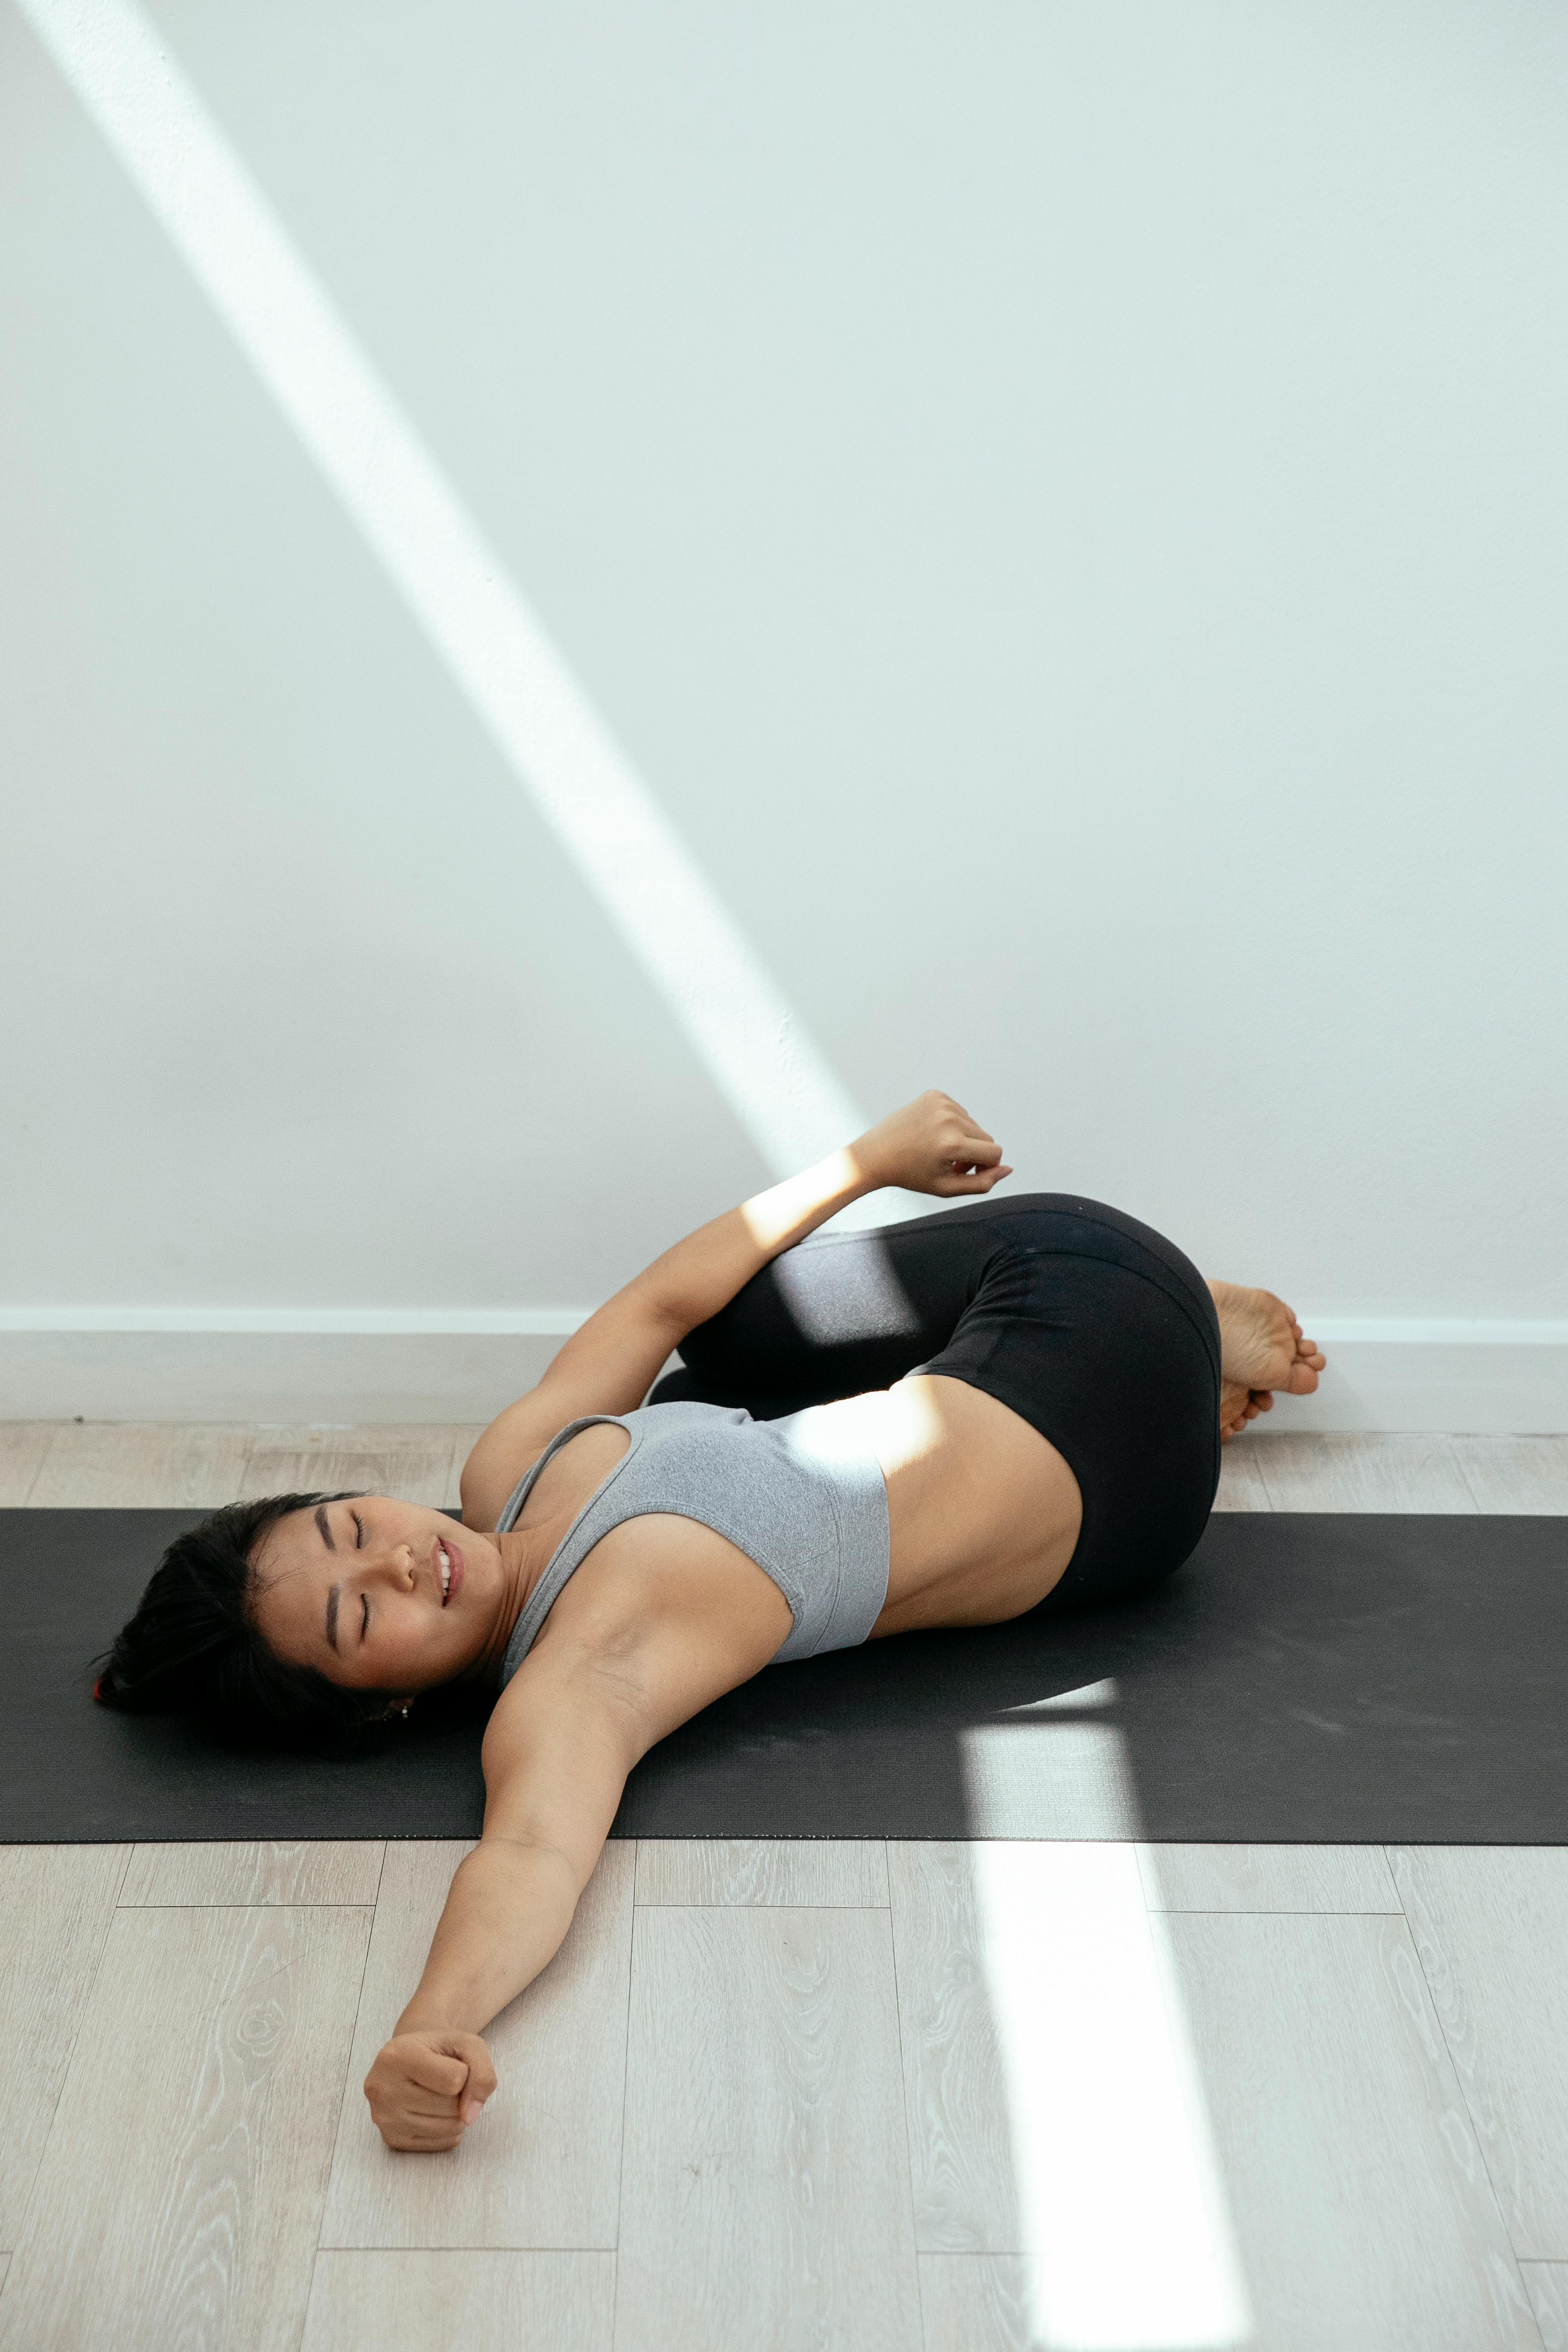 Slim Asian Lady Stretching Her Body on Yoga Mat during Her Home